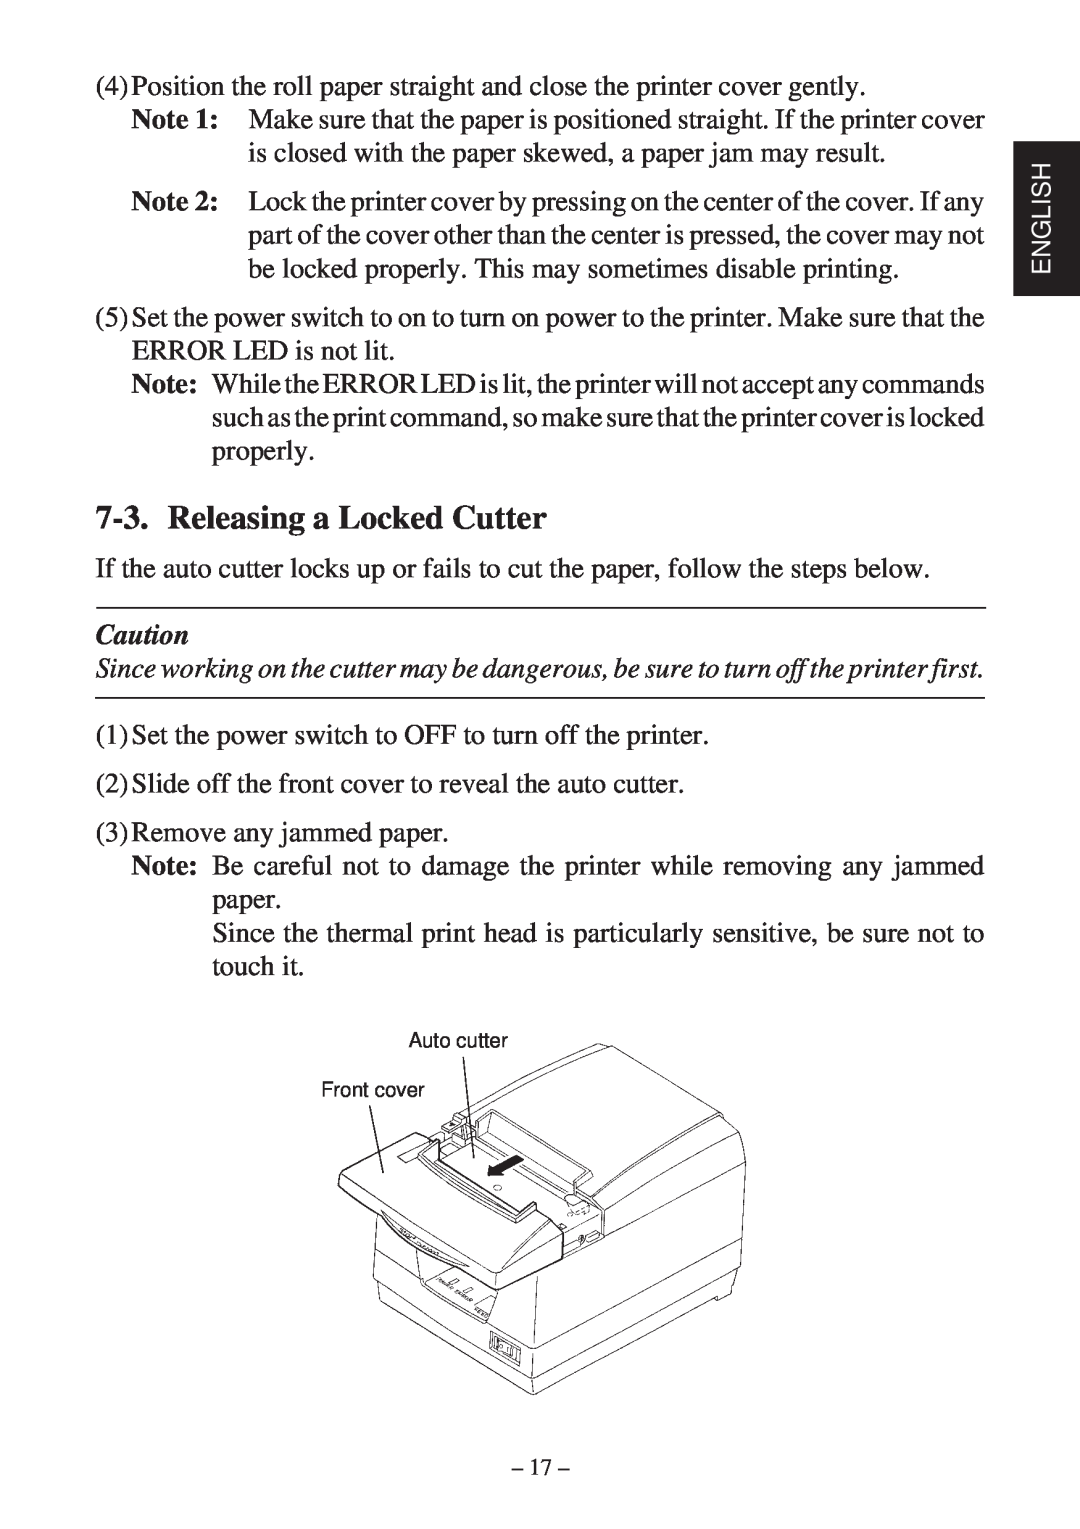 Star Micronics TSP2000 user manual Releasing a Locked Cutter, Auto cutter Front cover 